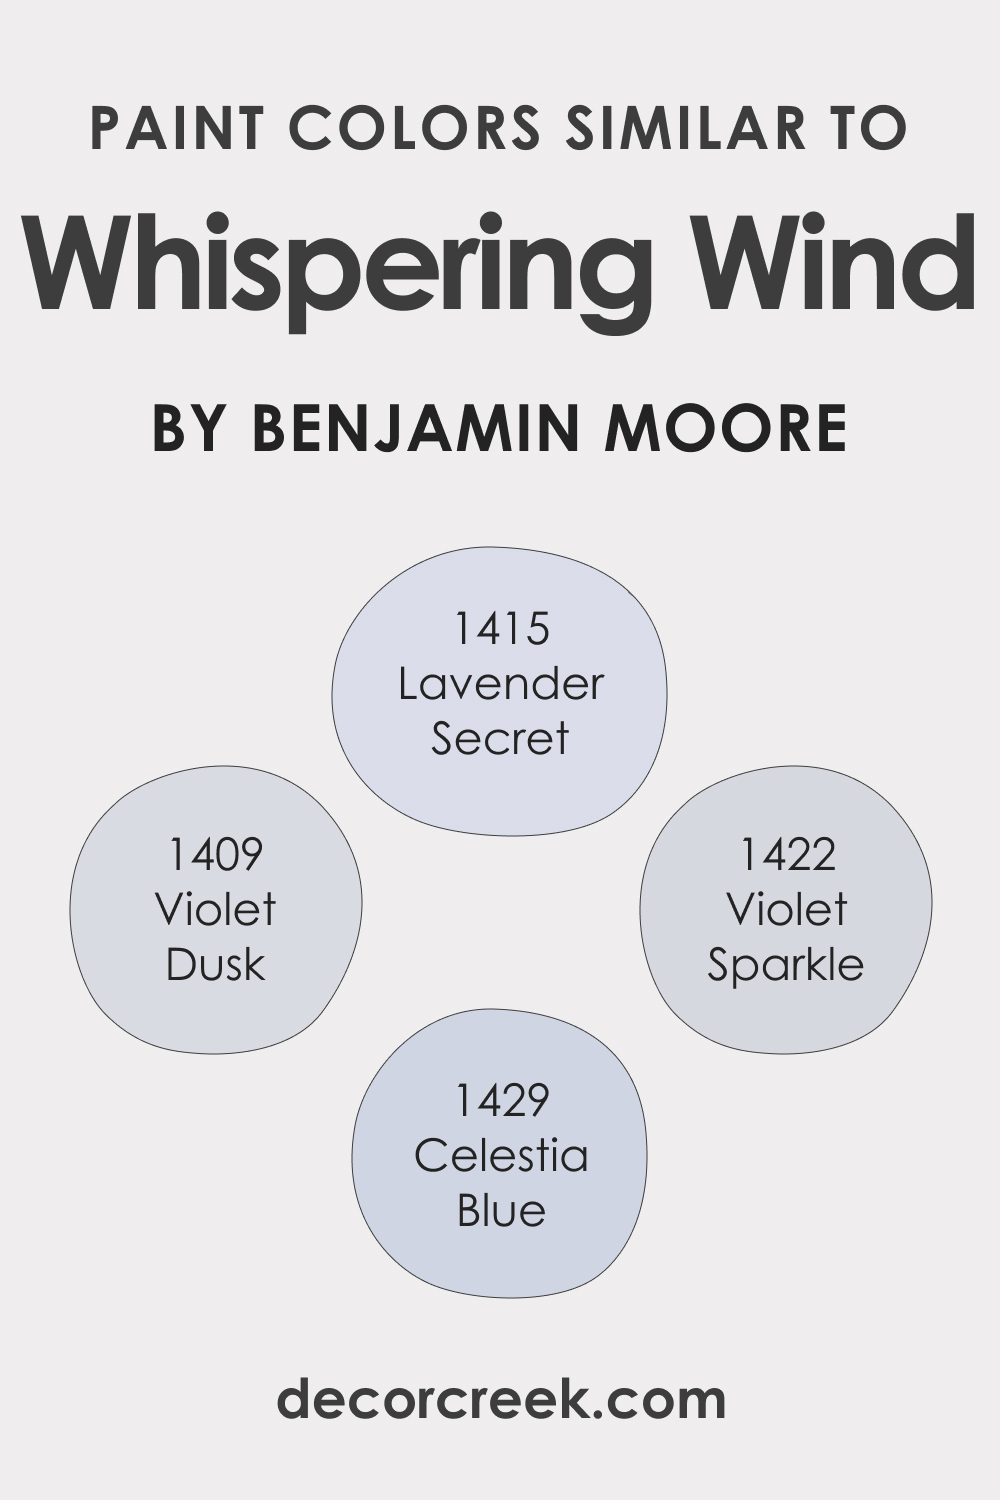 Colors Similar to Whispering Wind 1416